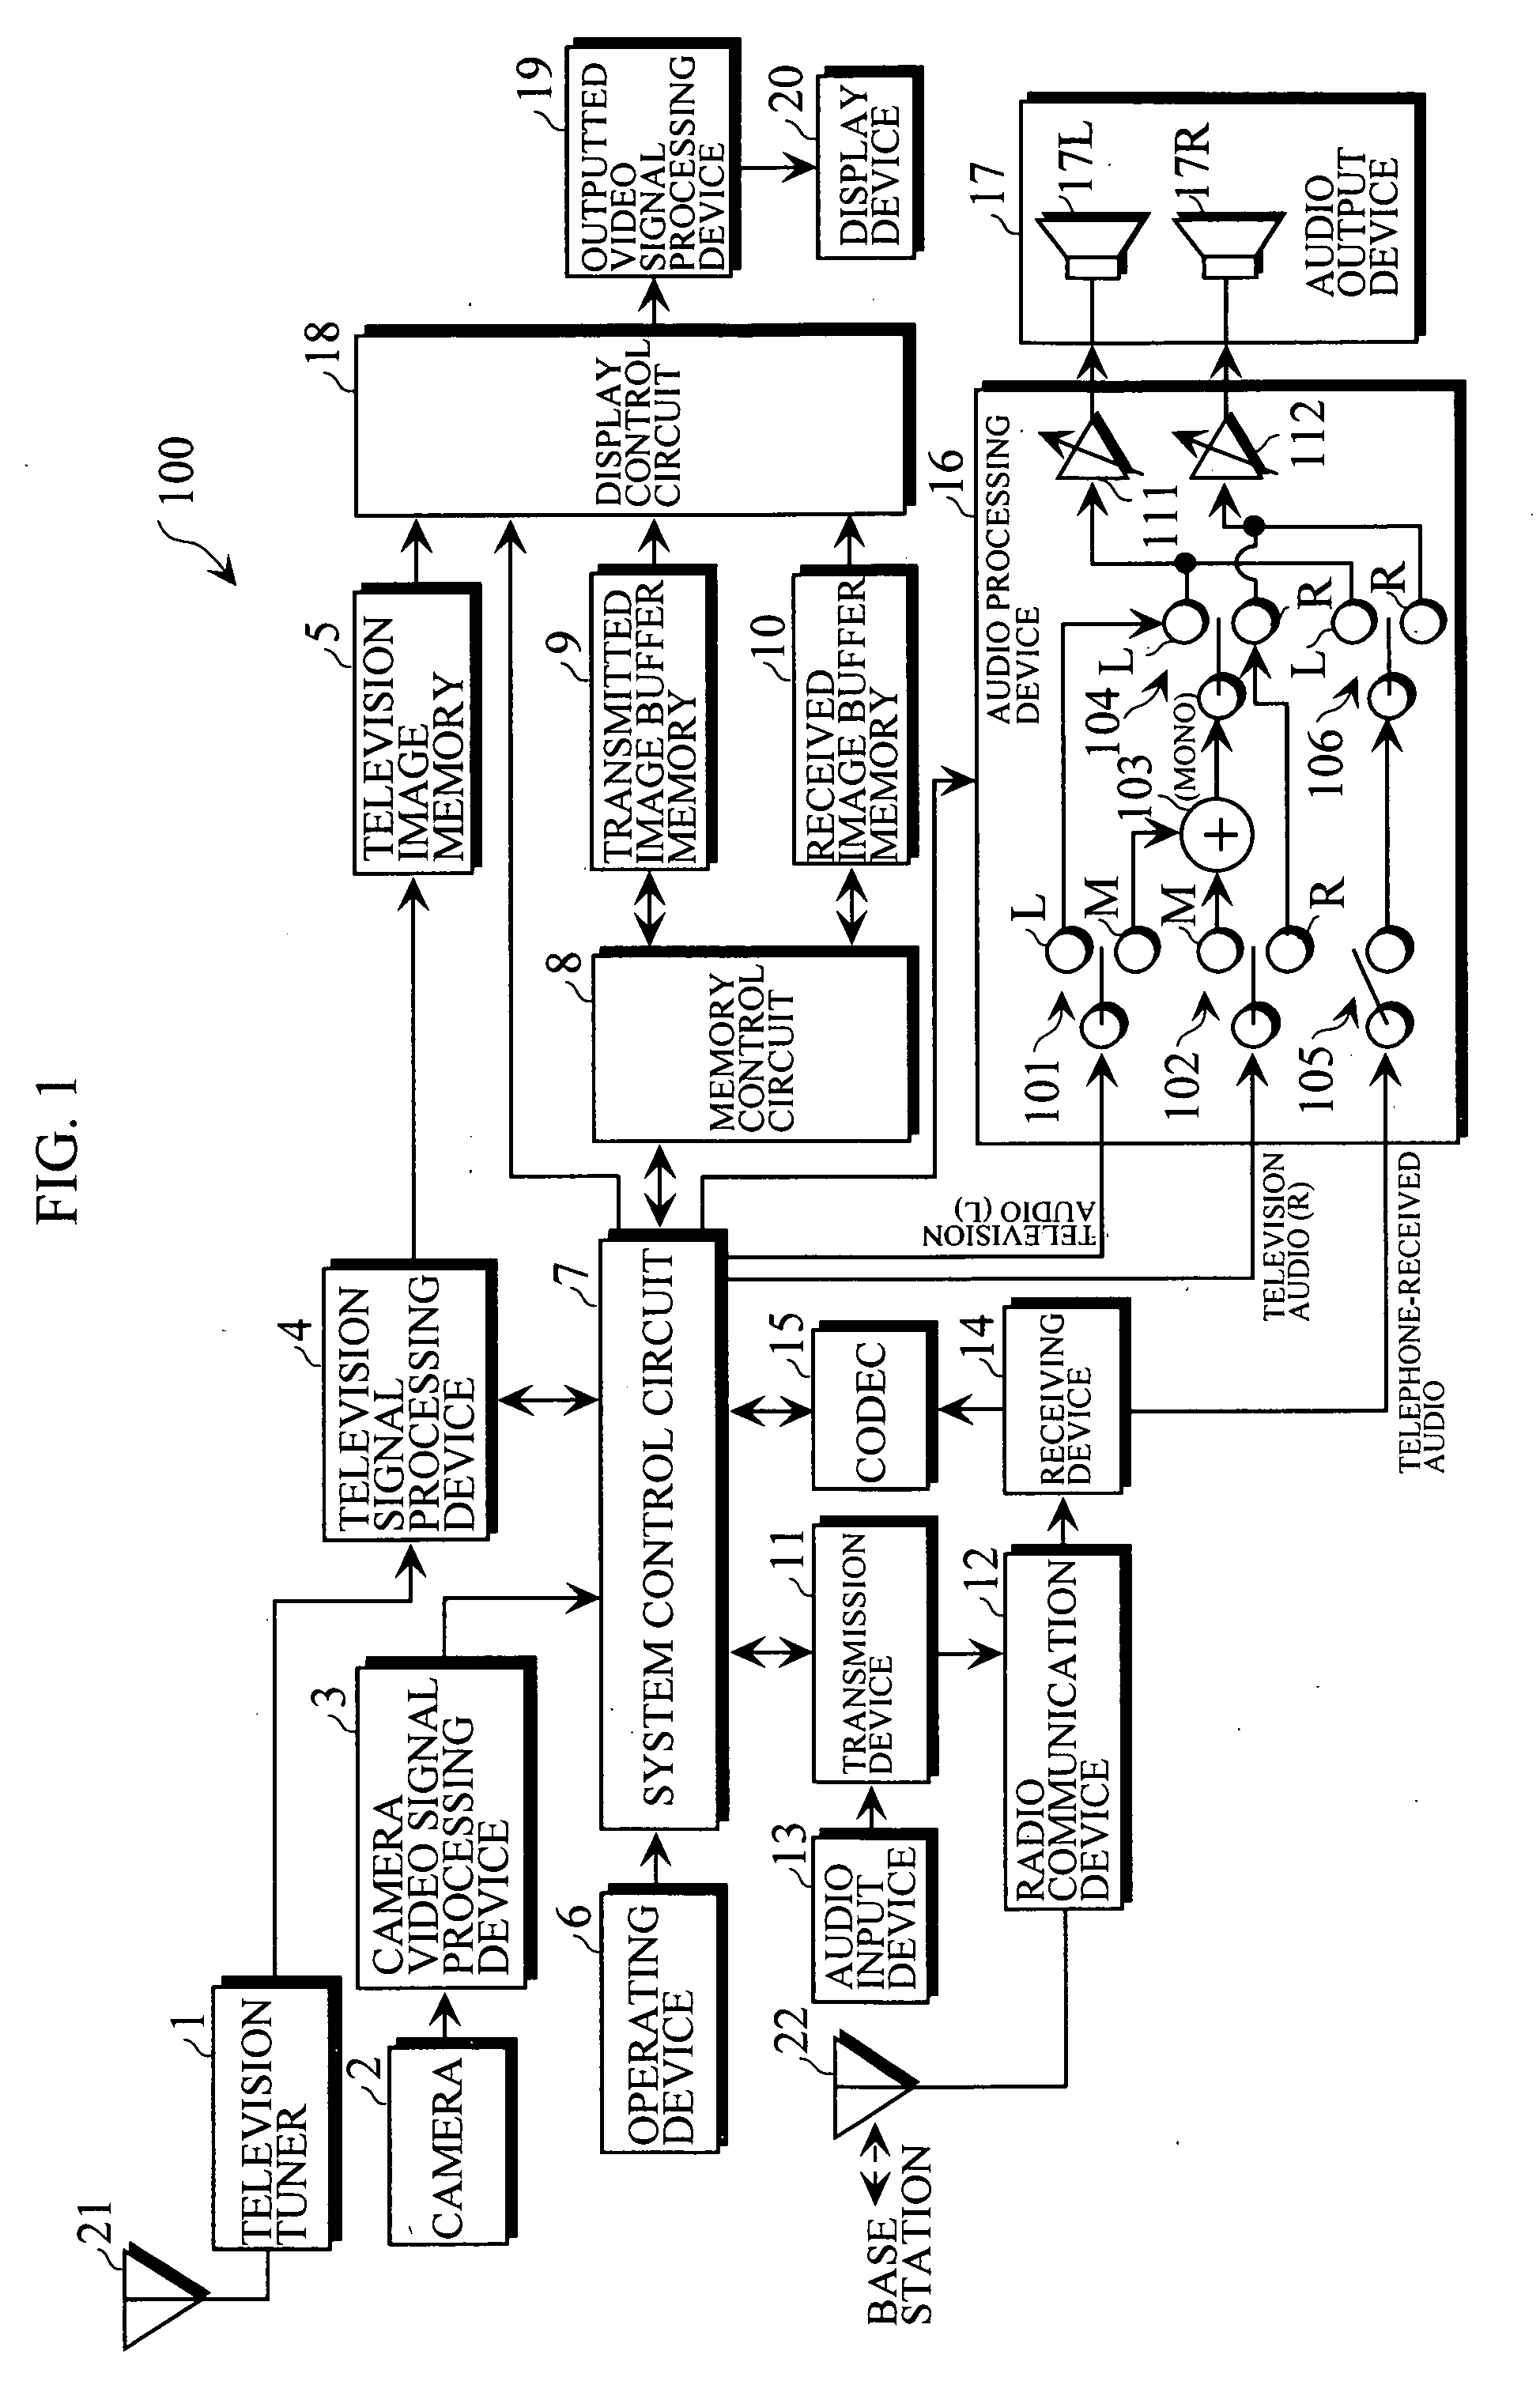 Mobile device having broadcast receiving function and telephone communication function